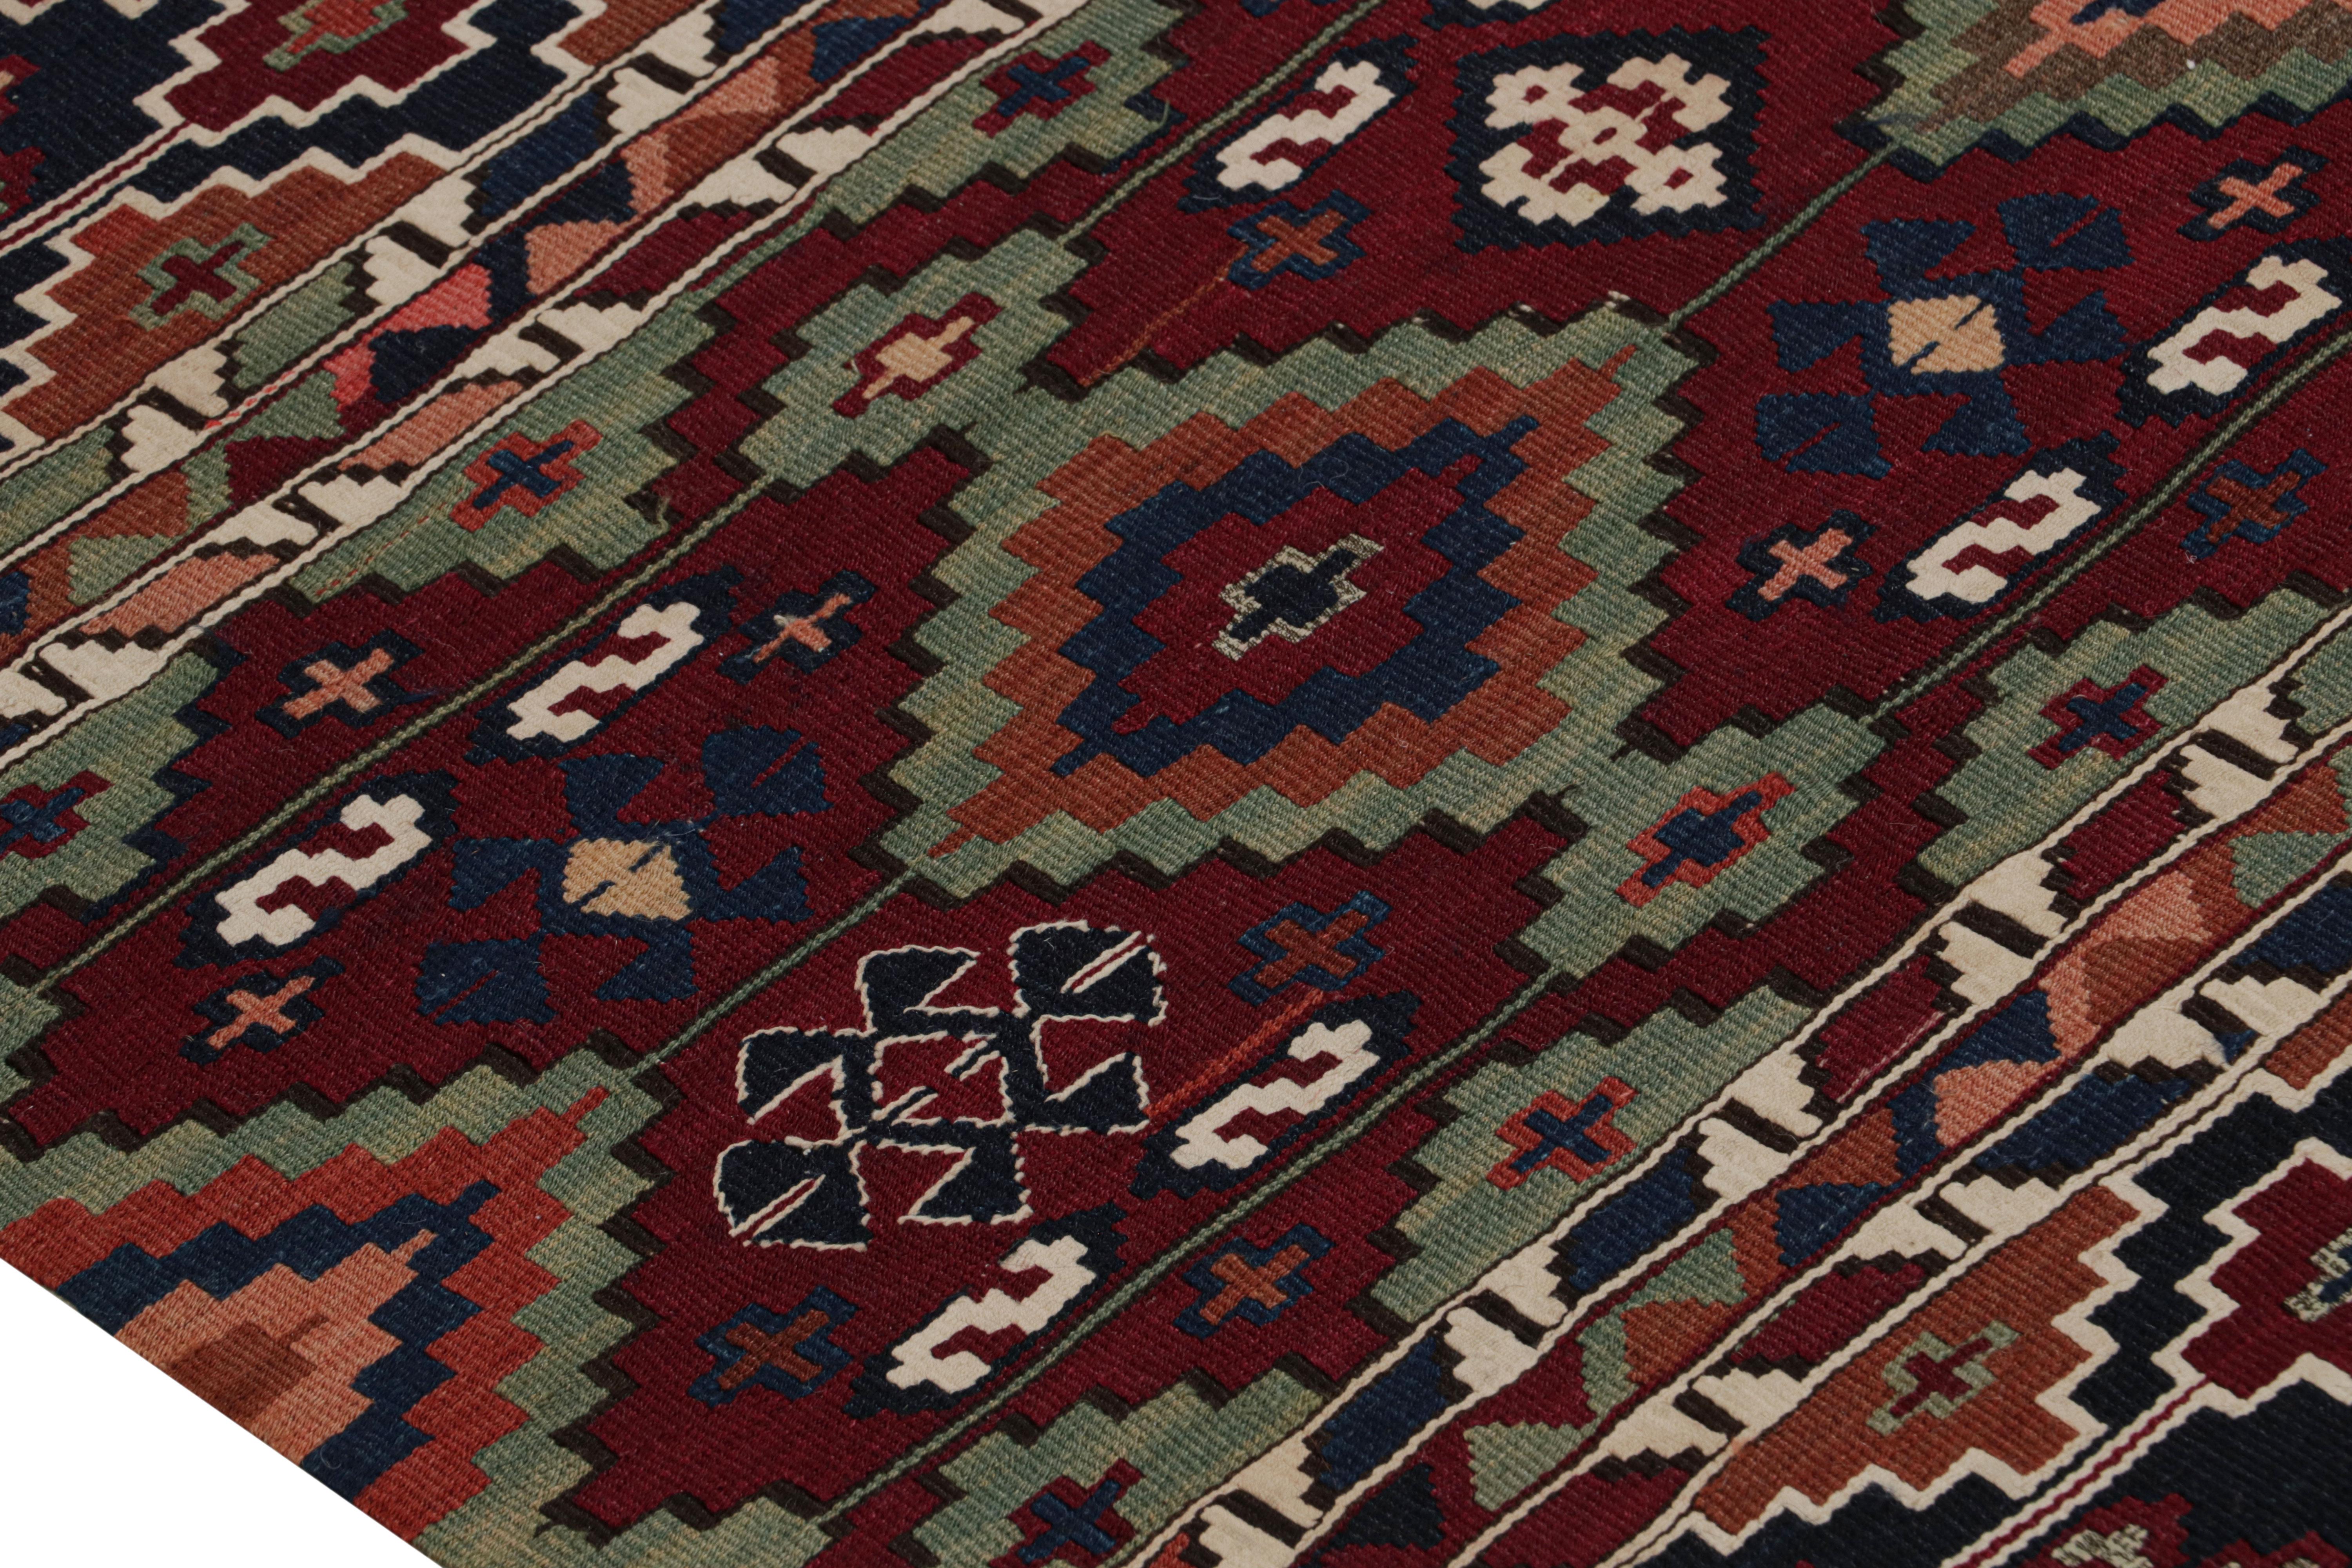 Hand-Knotted Antique Turkish Red and Blue Multi-Color Wool Kilim Rug by Rug & Kilim For Sale